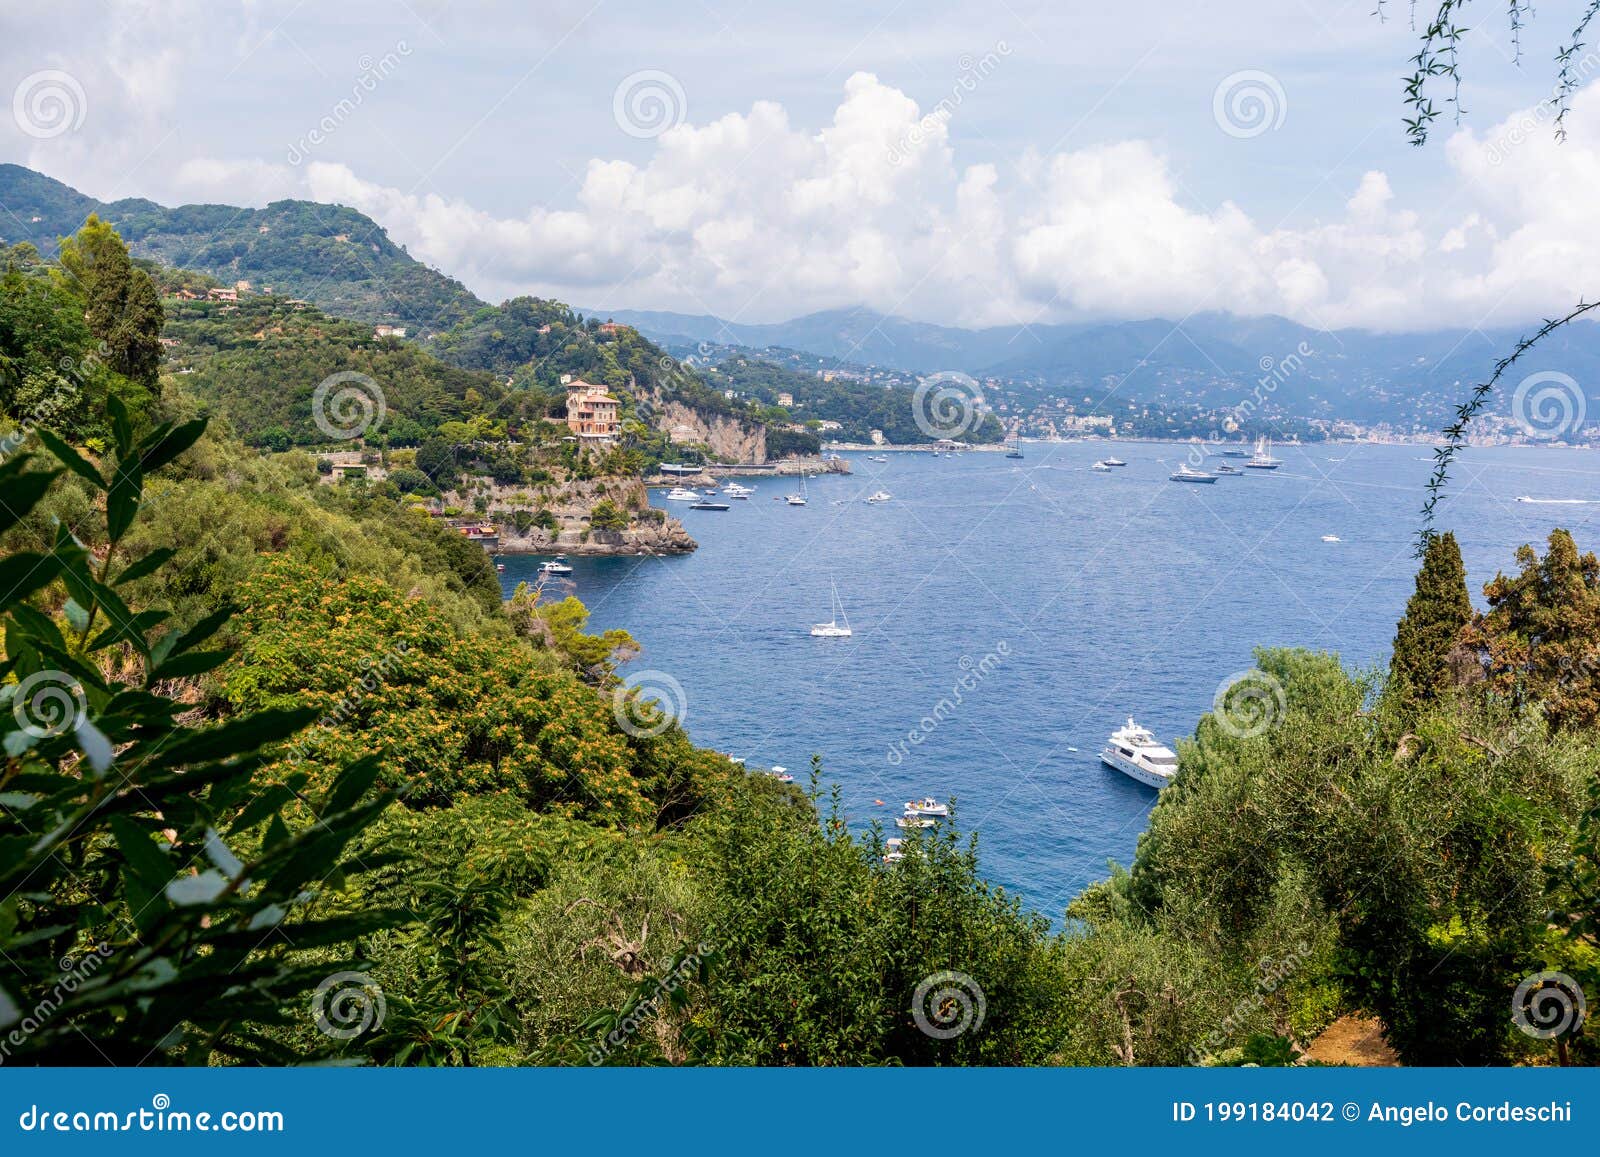 panoramic view of the coast of portofino and the ligurian sea in the mediterranean. trees and vegetation and some boats with